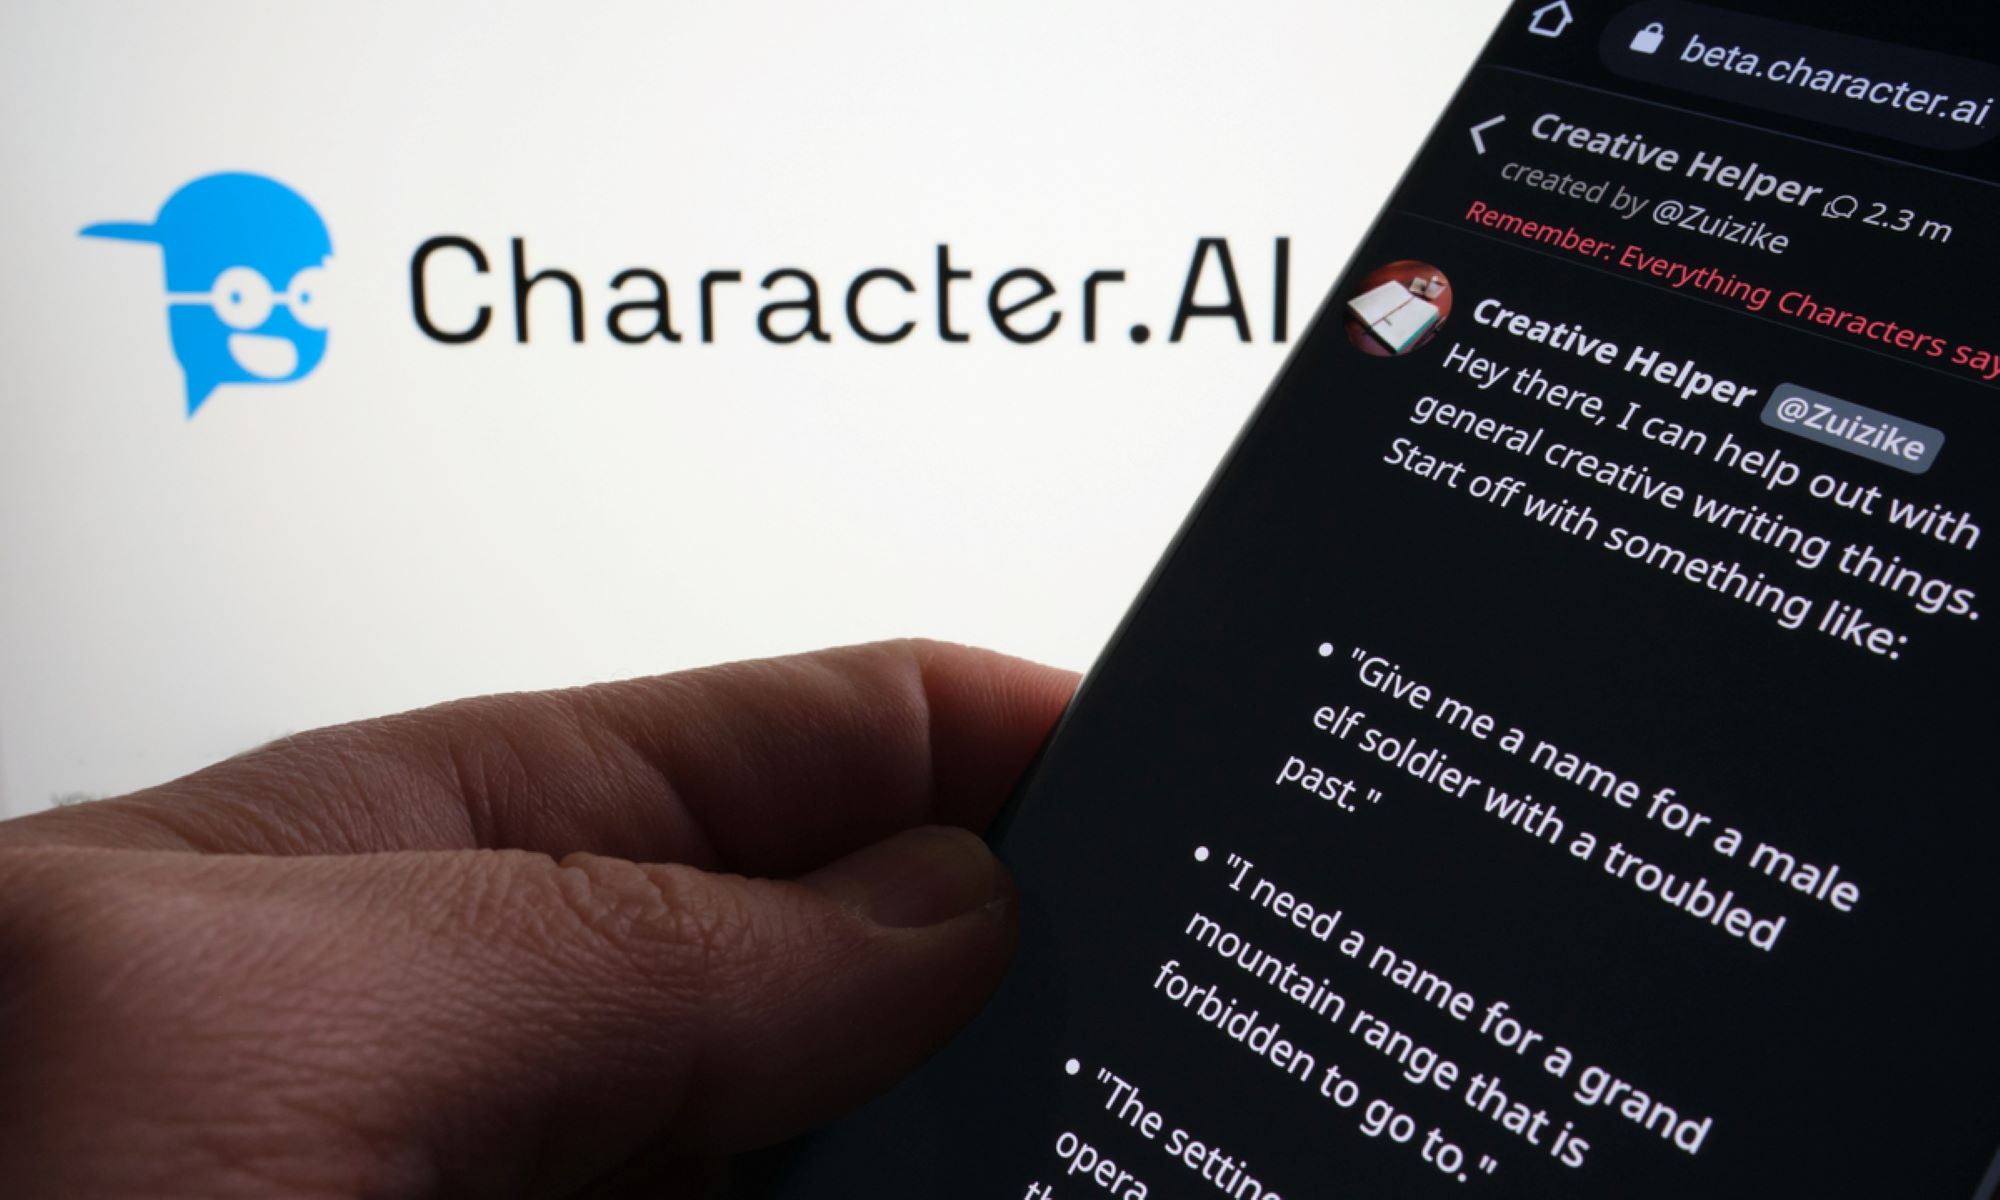 The Involvement Of Real People In Beta.Character.Ai: A Closer Look At Its Human Touch